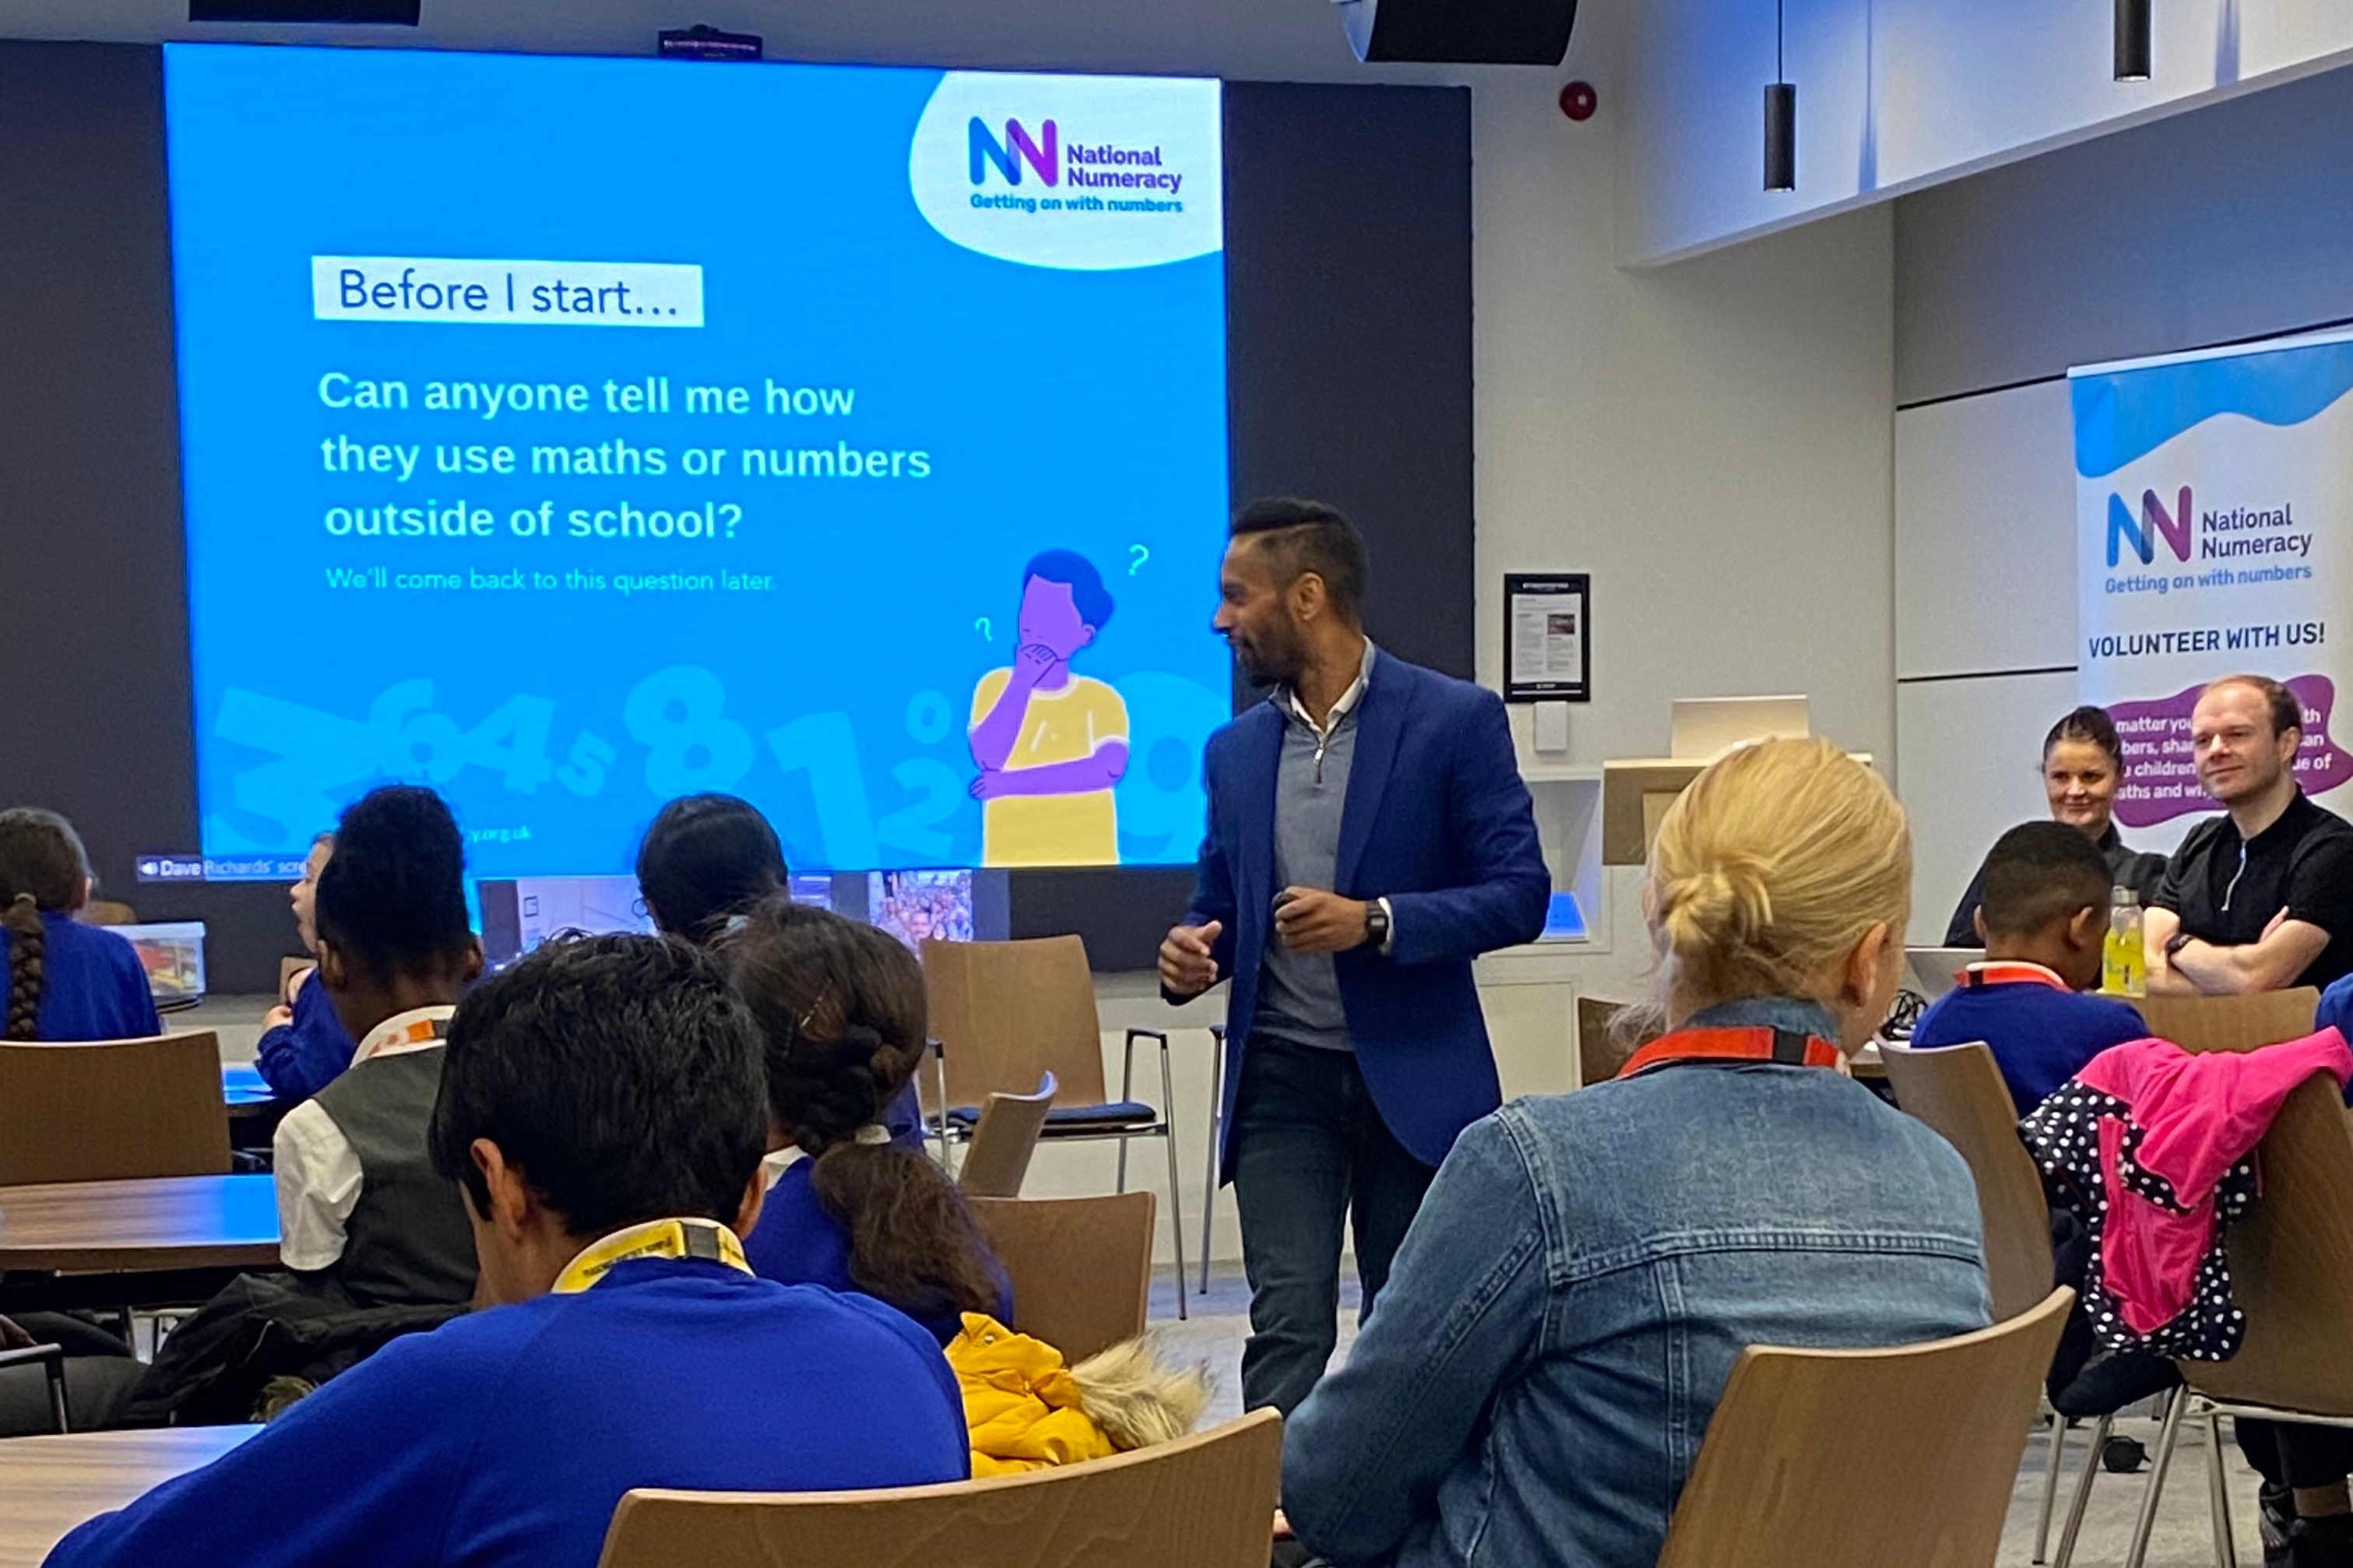 Bobby Seagull with Capital One, leading a session for children